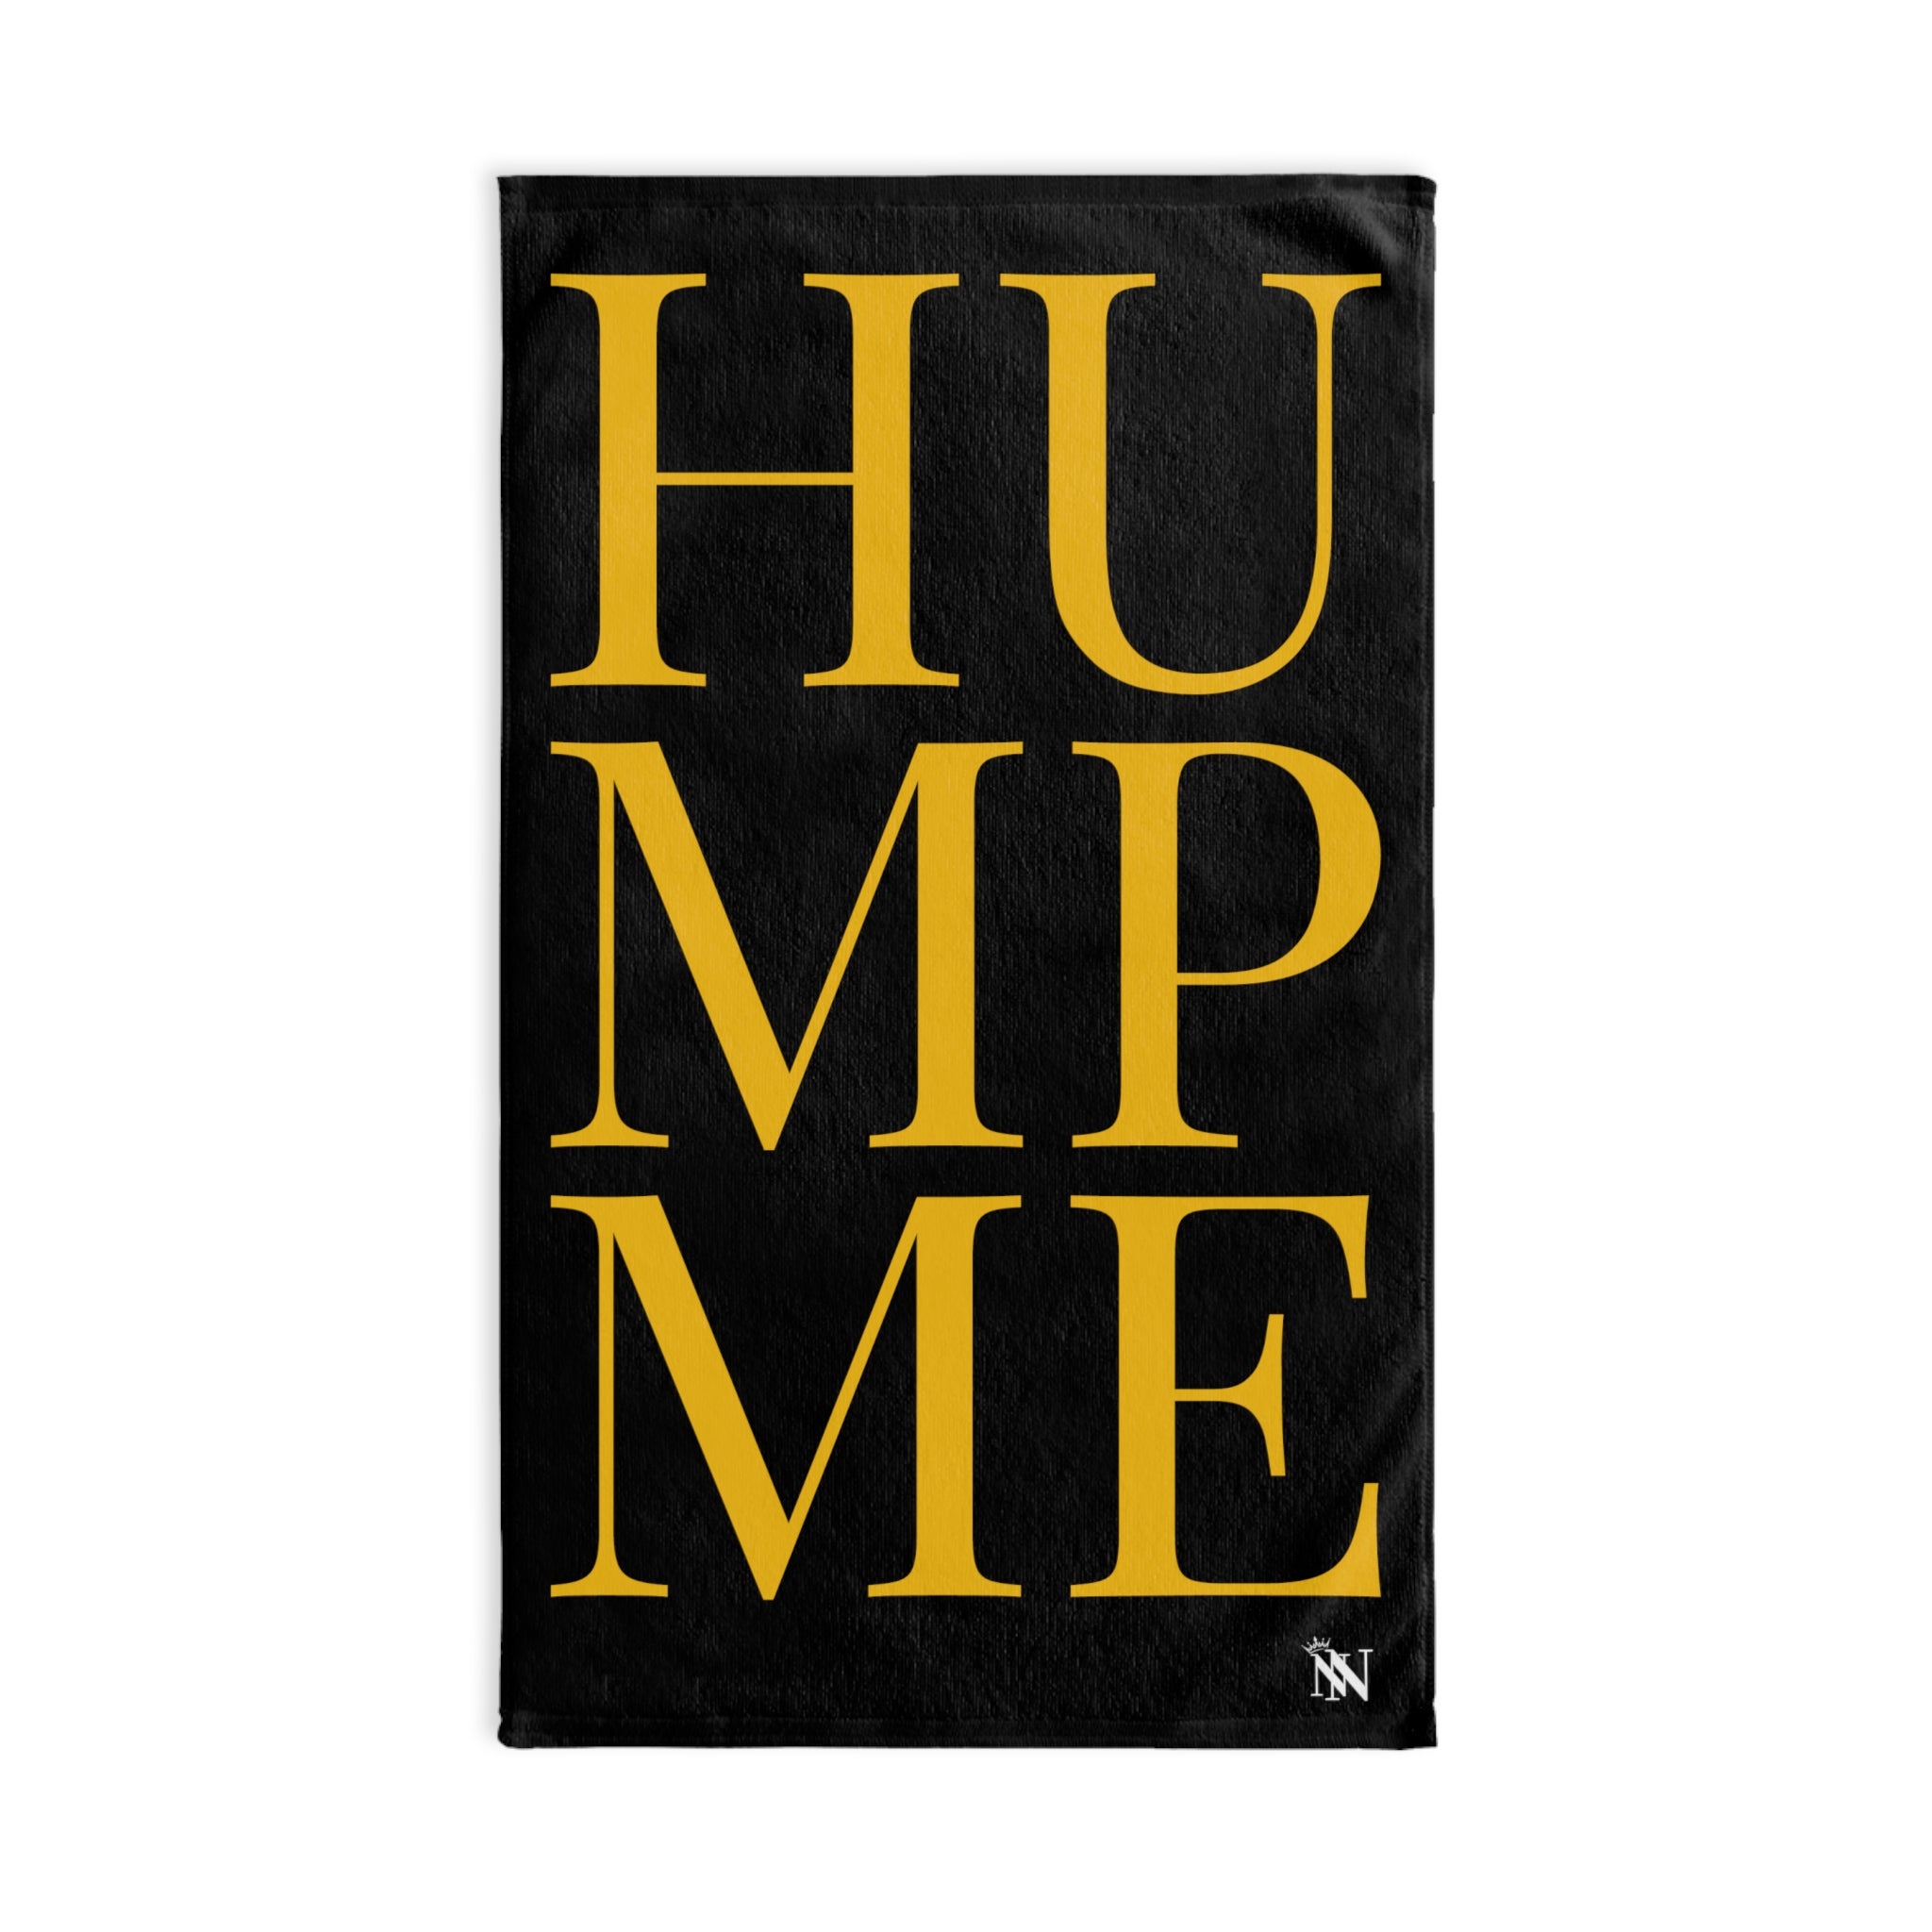 Hump Me Yellow Black | Sexy Gifts for Boyfriend, Funny Towel Romantic Gift for Wedding Couple Fiance First Year 2nd Anniversary Valentines, Party Gag Gifts, Joke Humor Cloth for Husband Men BF NECTAR NAPKINS